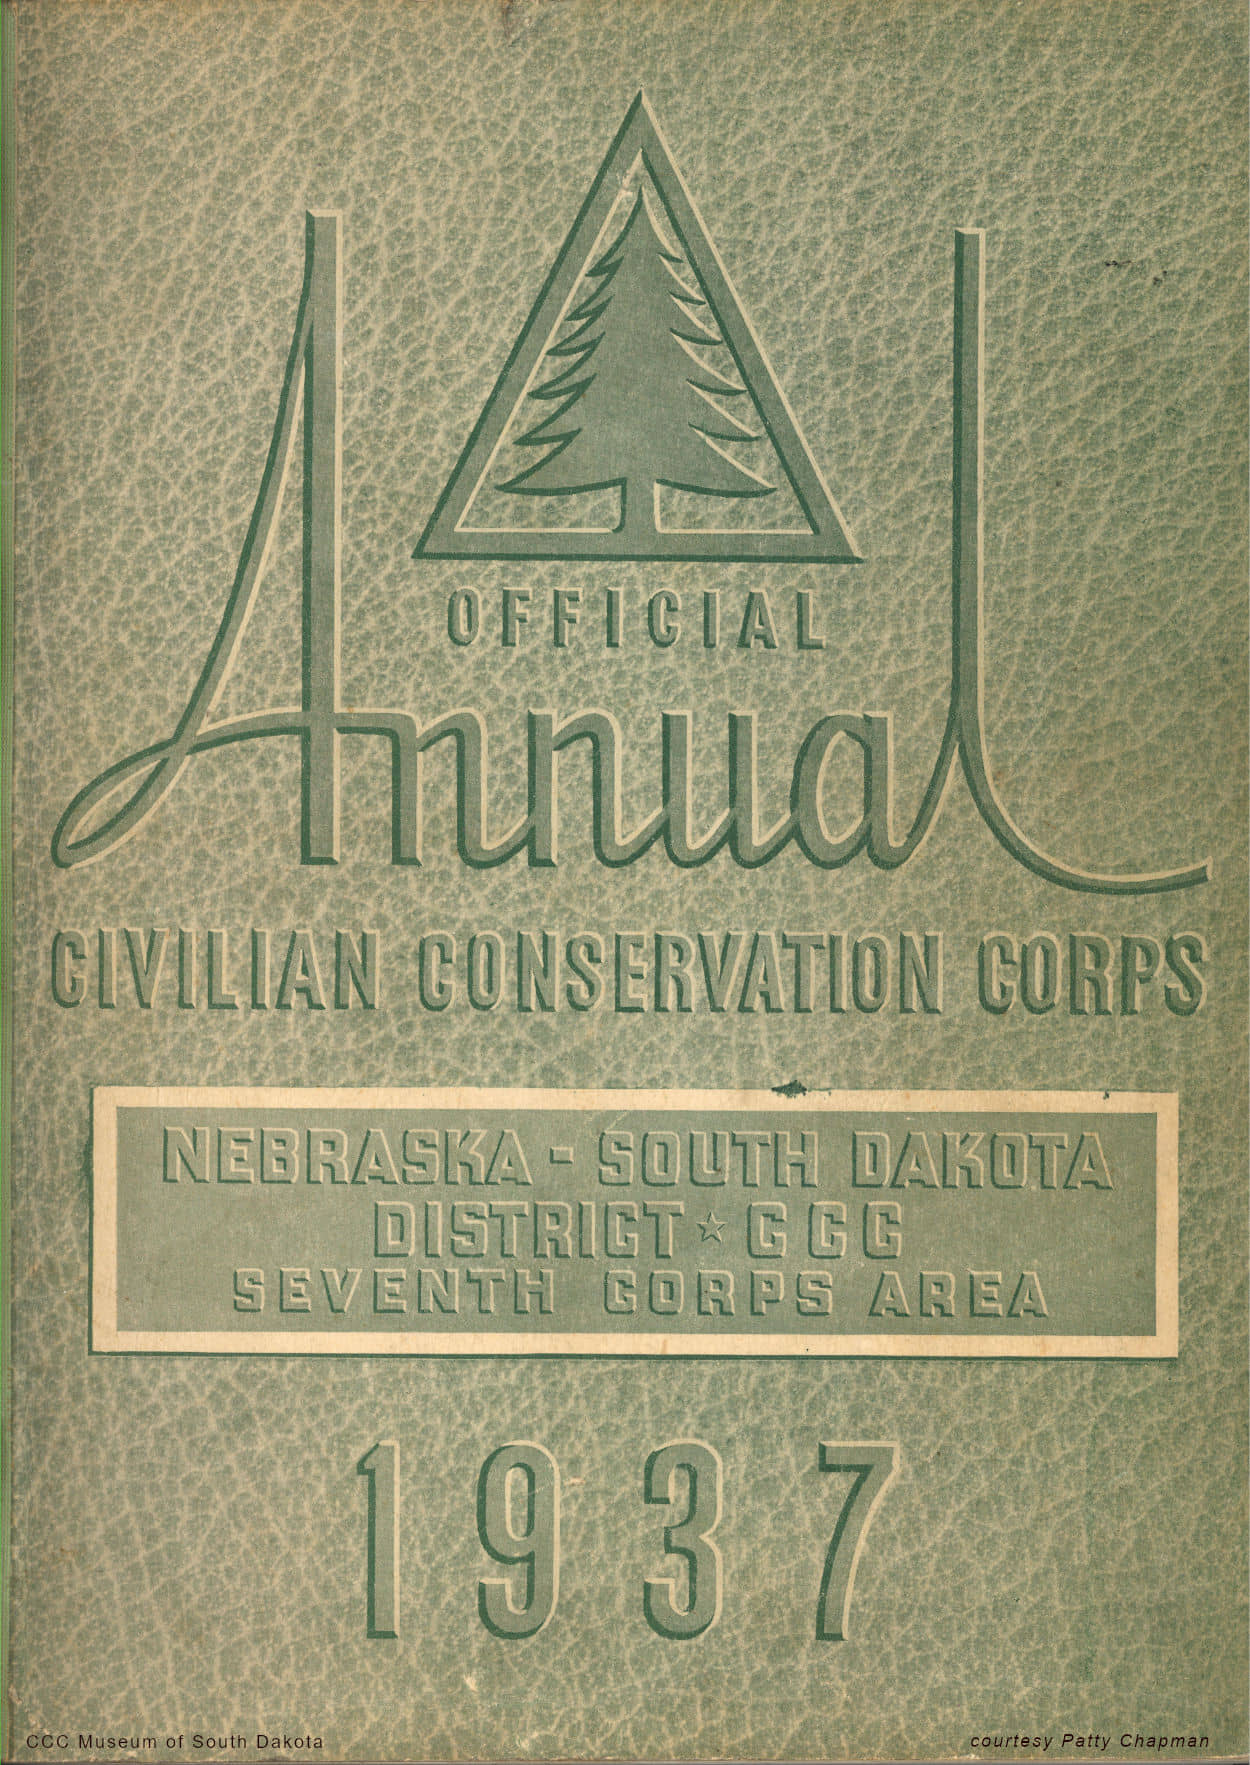 Cover of the 1937 District Annual